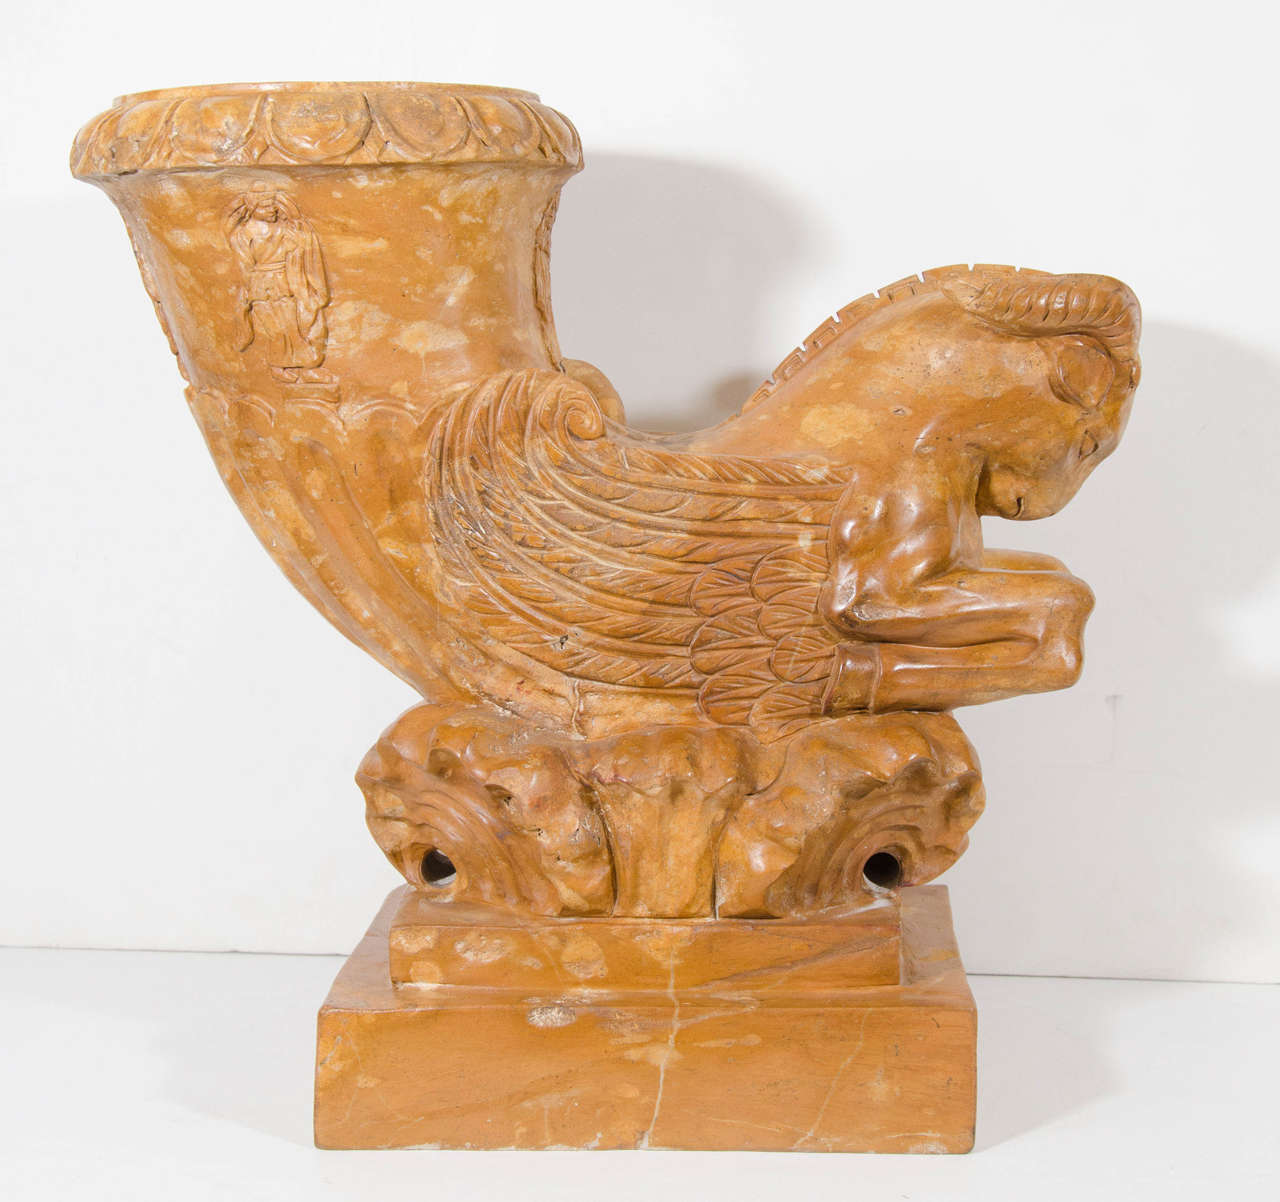 A 20th century pair of neoclassical style Siena marble urns depicting a winged ram. Good condition with some cracks and wear to marble due to age.